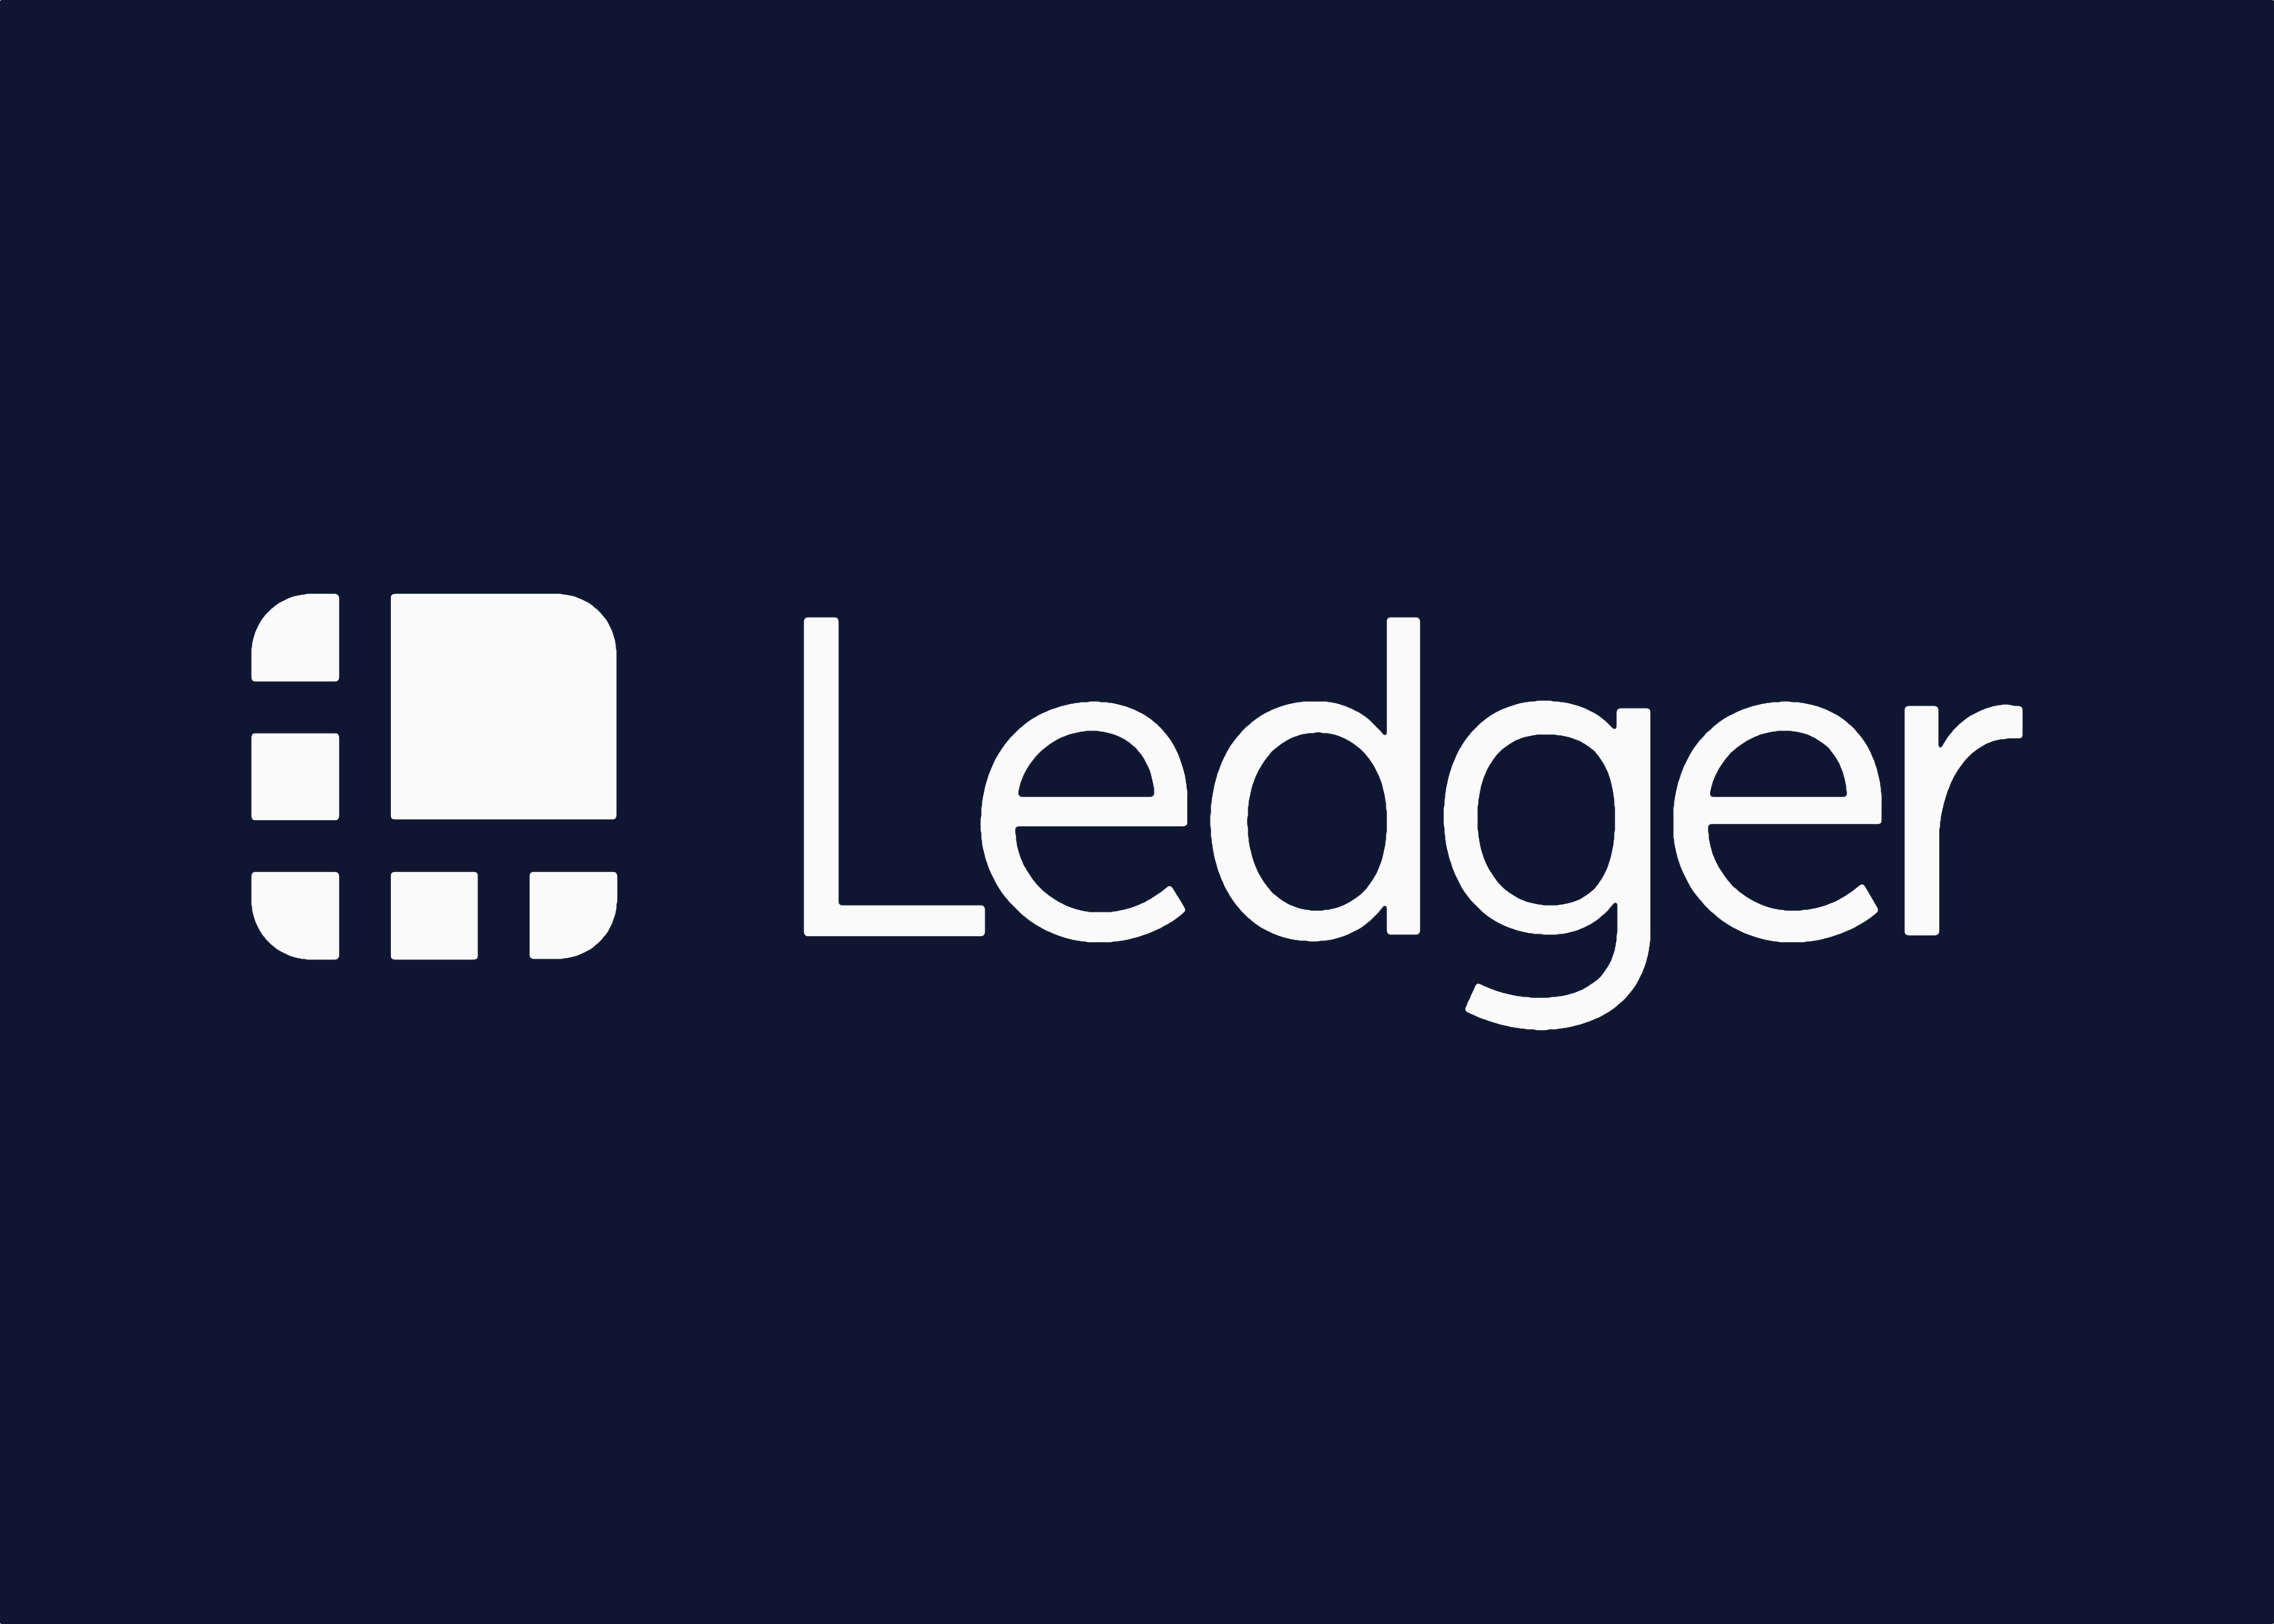 Ledger Hardware Wallet Hack Leads to $484,000 Theft in DeFi Sector